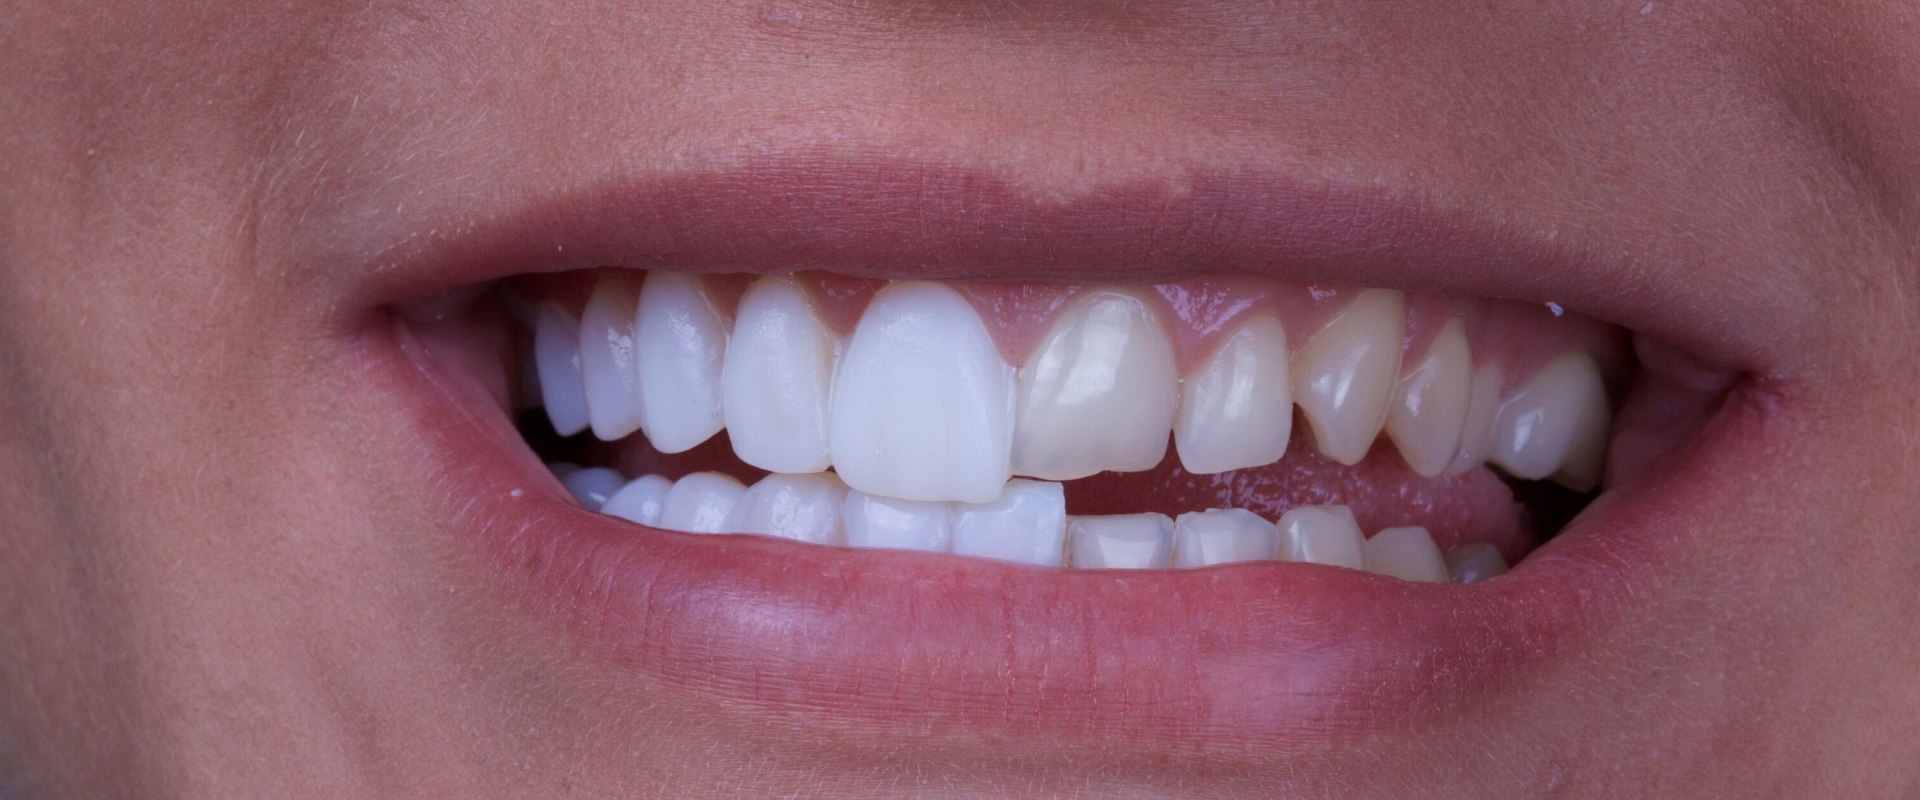 Are tooth veneers a good idea?